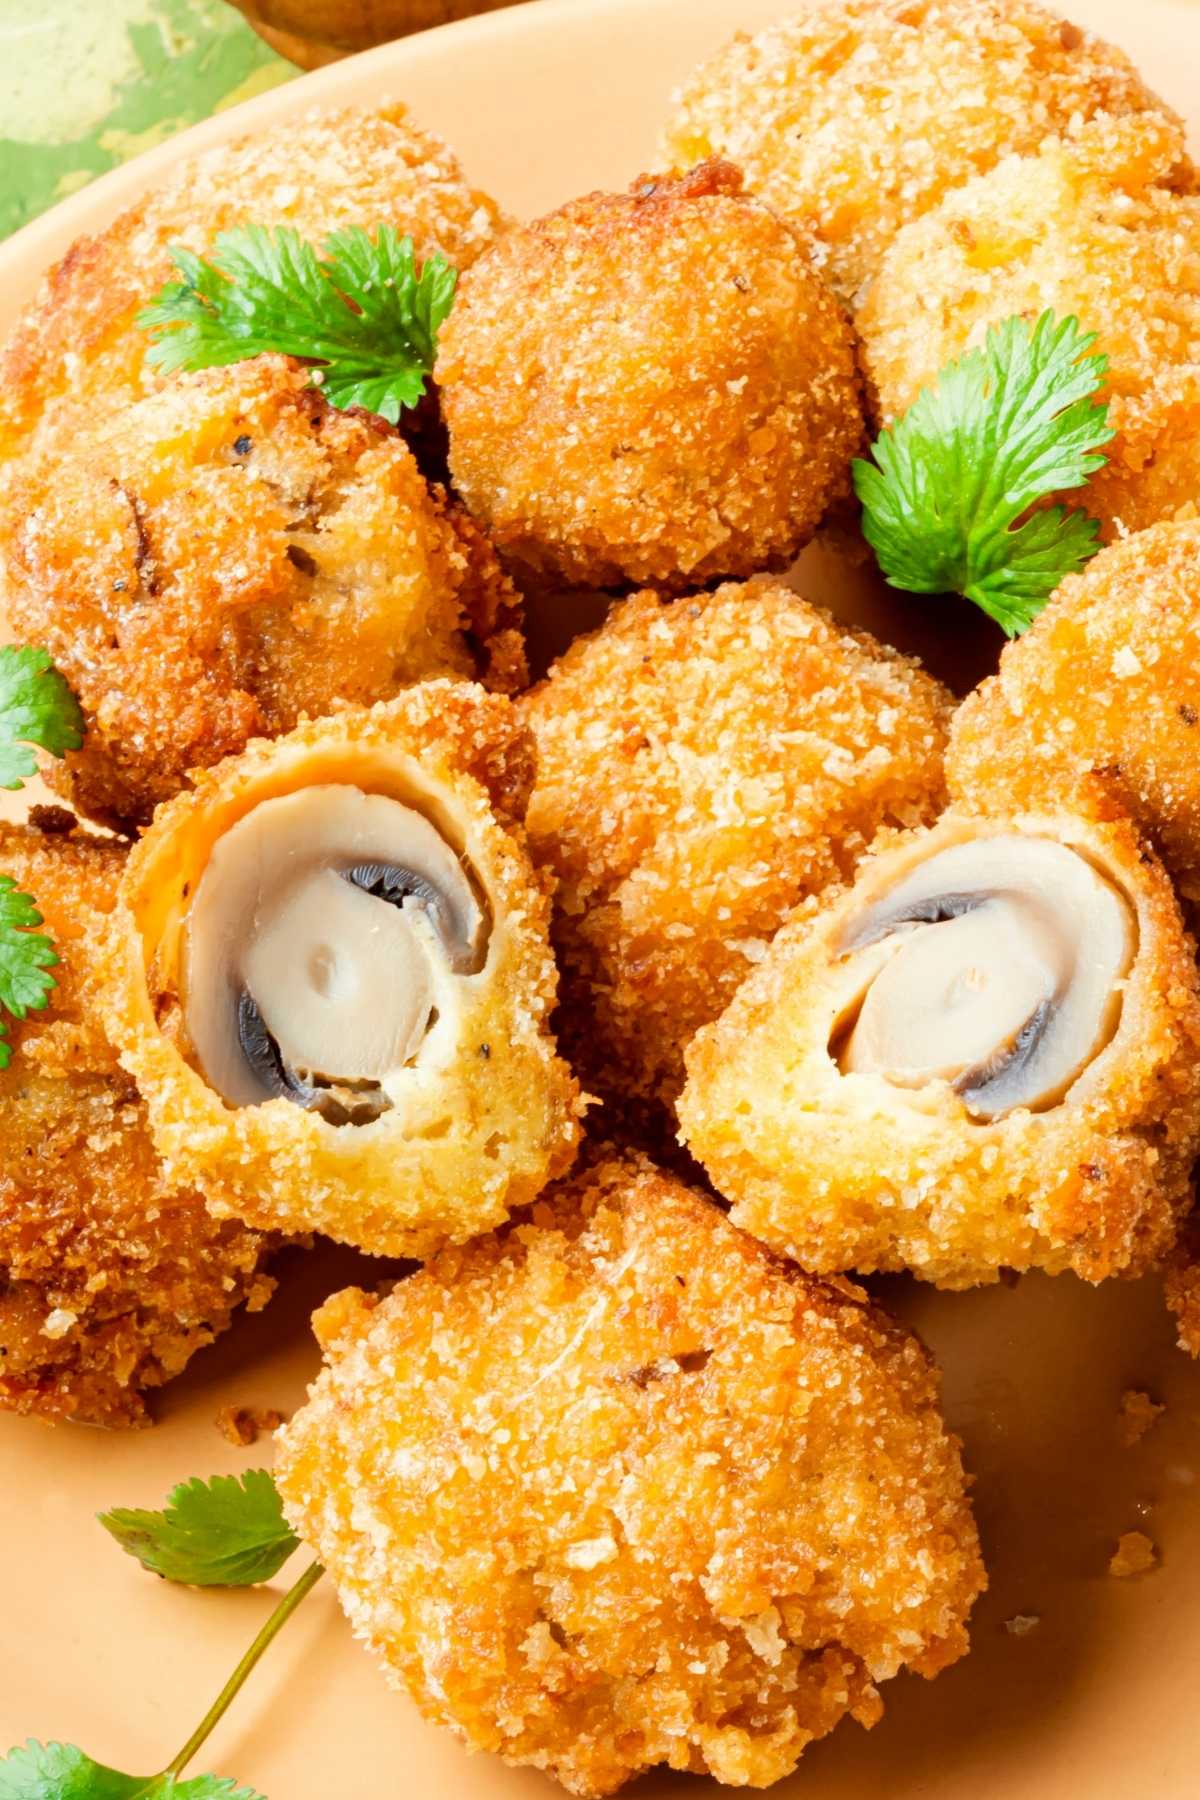 Fried mushrooms are a tasty side dish that can be served with just about anything! This recipe is super simple and takes about 30 minutes to make.